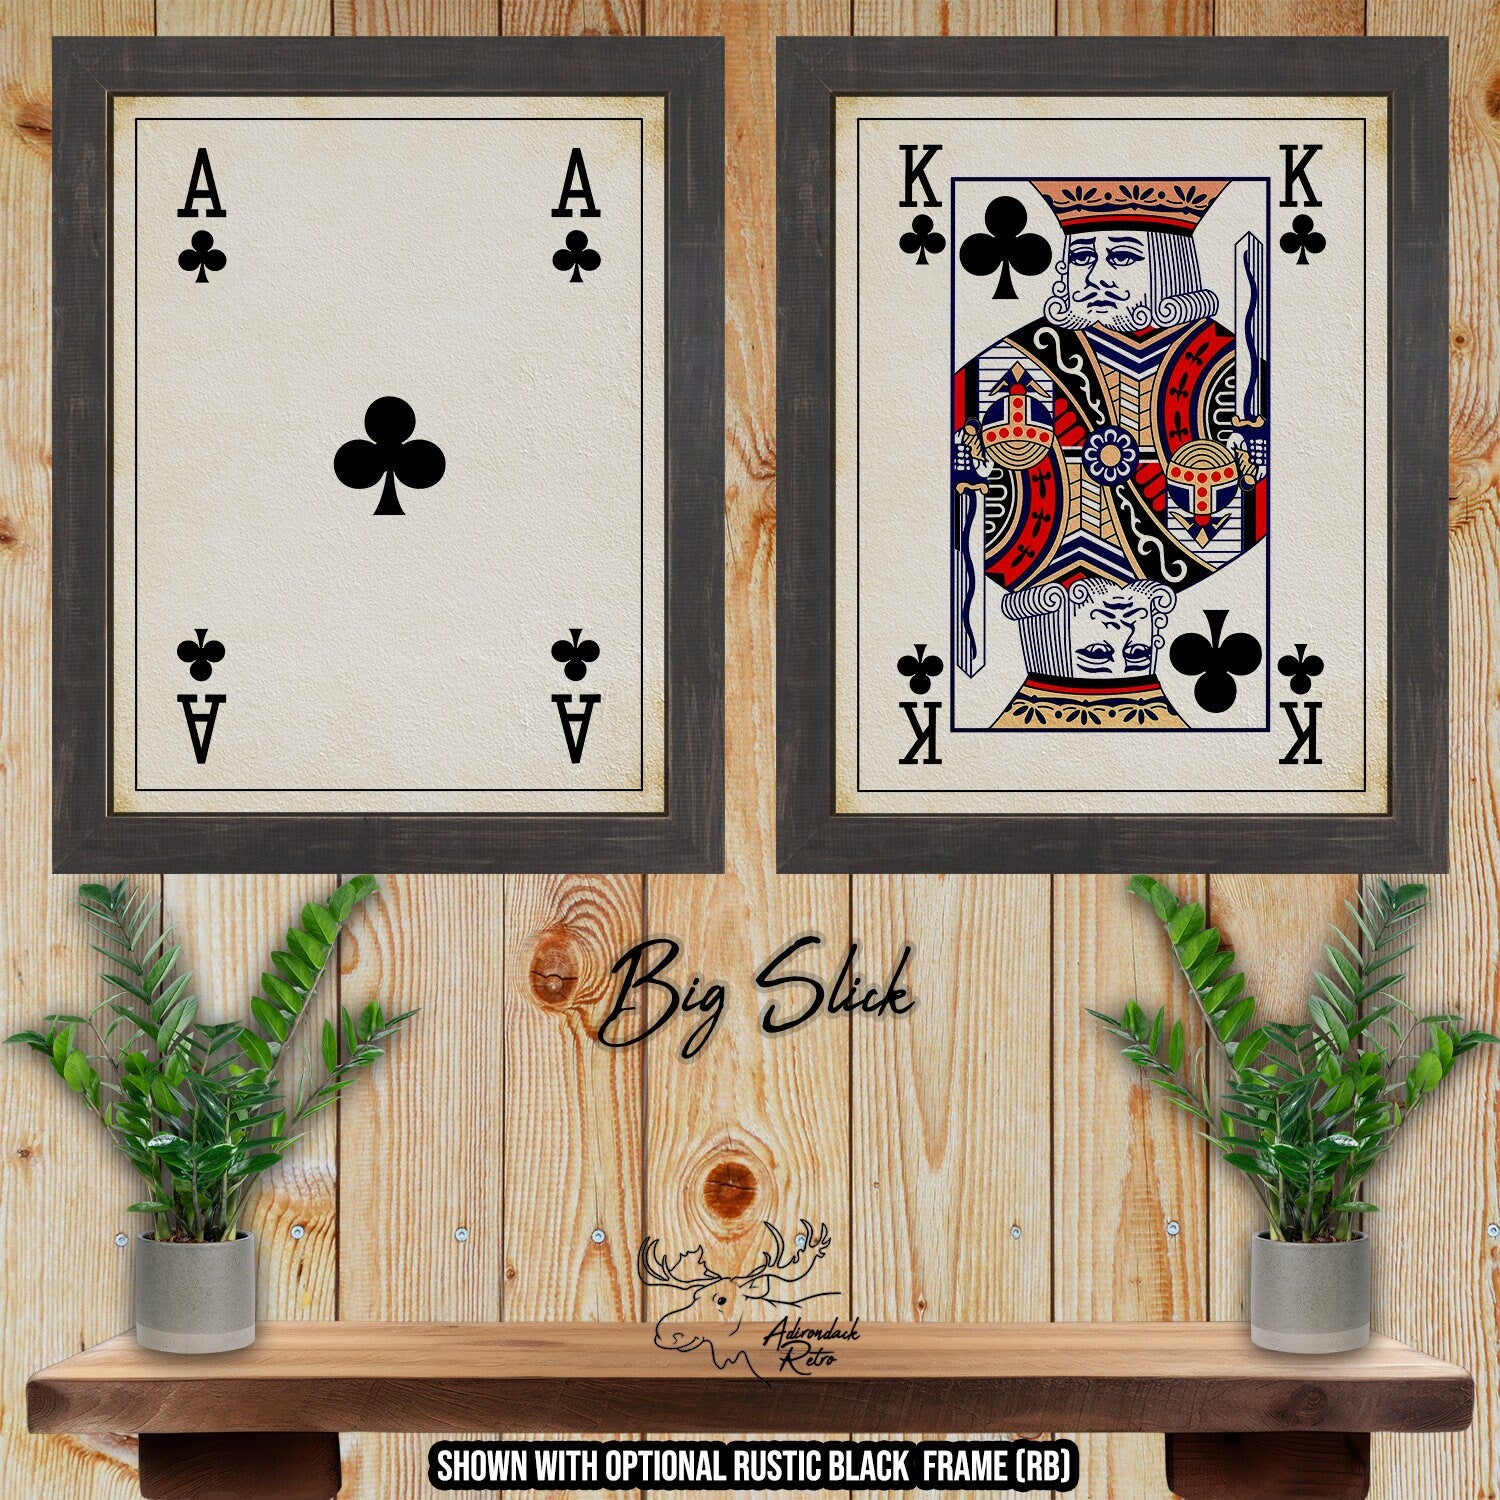 Ace and King of Clubs Playing Card Fine Art Prints - Big Slick Poker Card Posters at Adirondack Retro